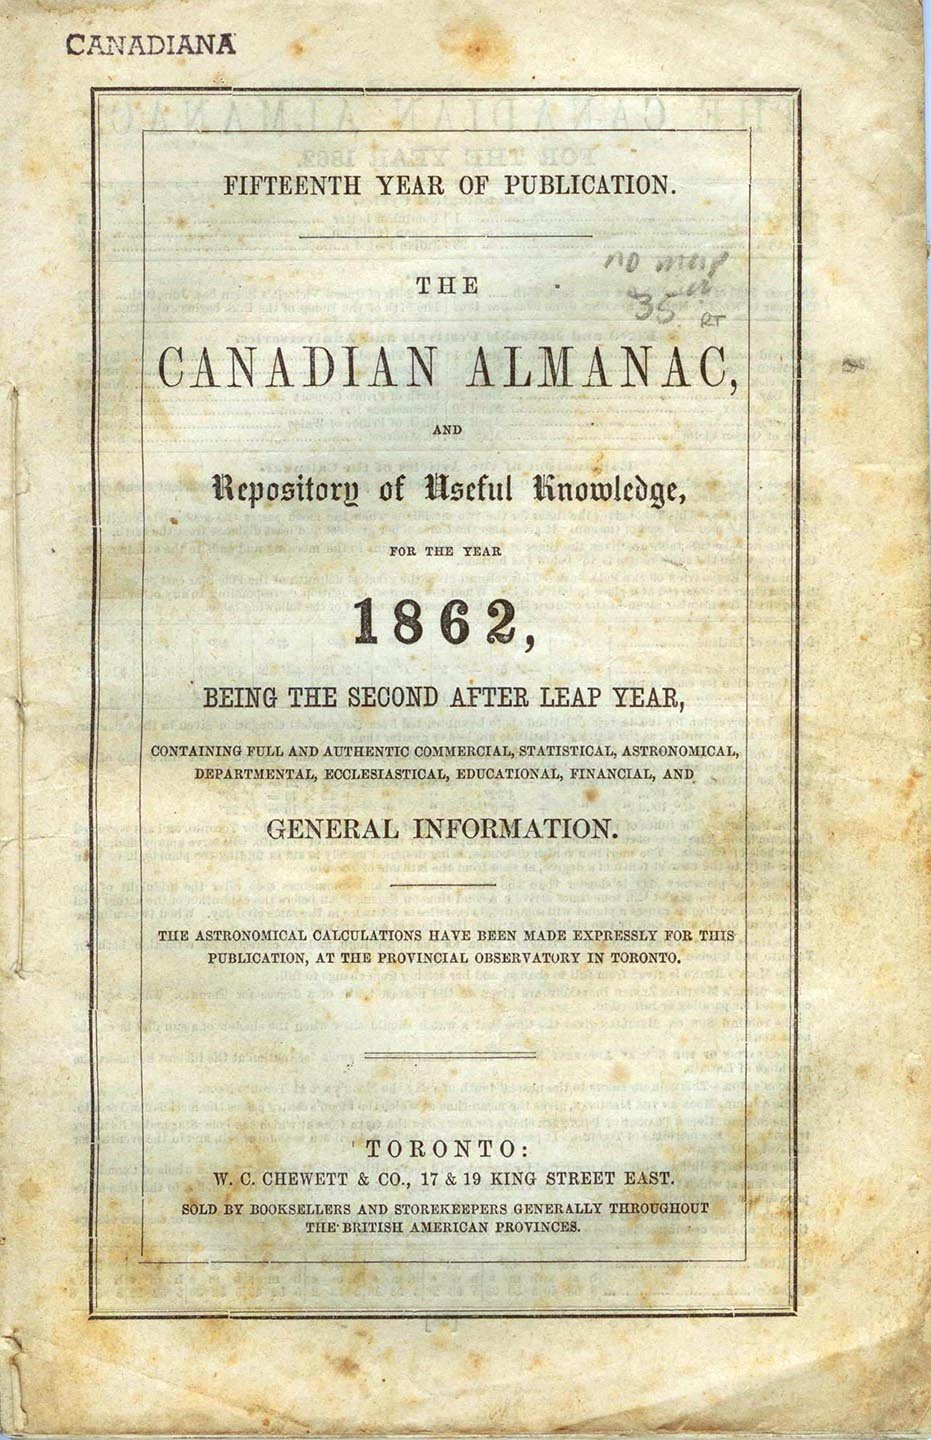 The Canadian Almanac, and Repository of Useful Knowledge for the year 1862